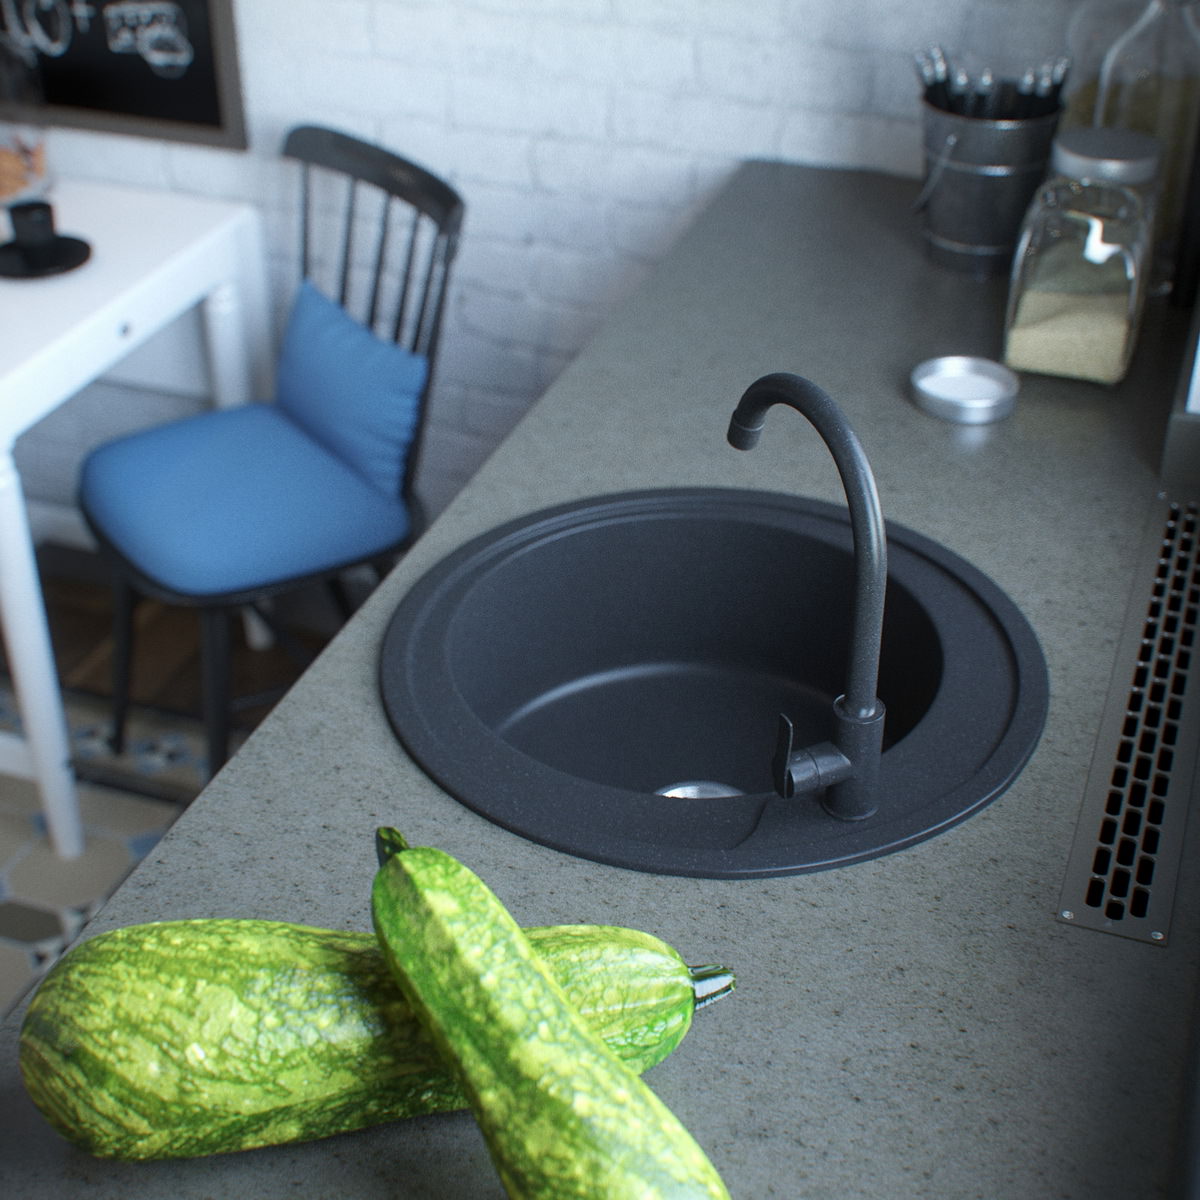 High quality close-up view of the kitchen washing sink and zucchinis.